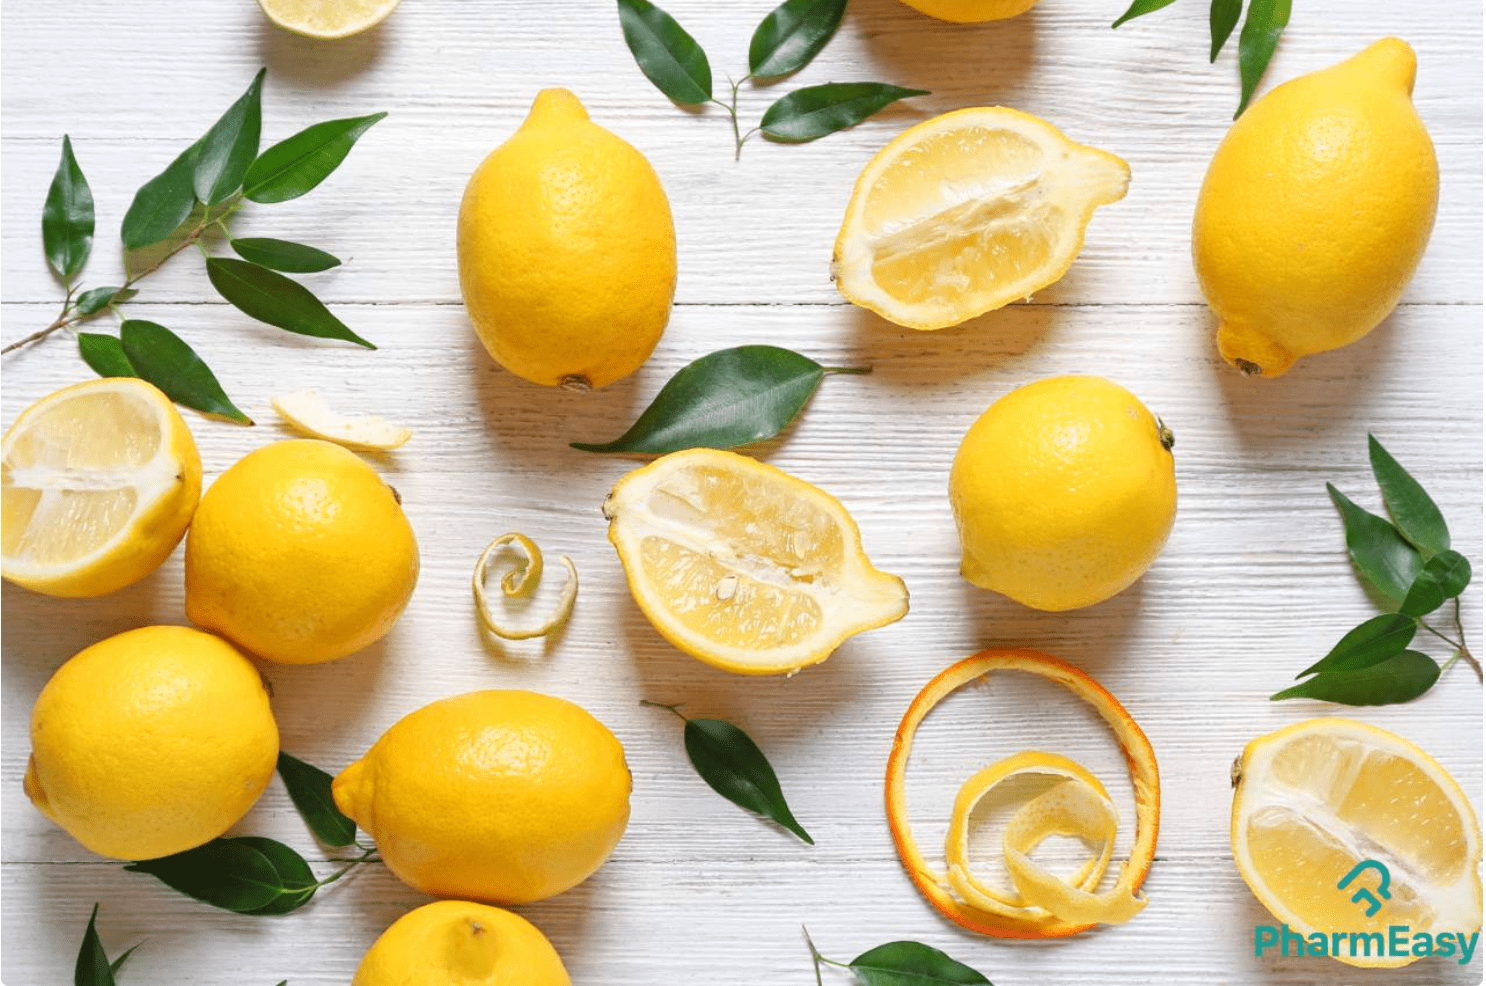 Lemon Water: Health Benefits, Nutrition, and Risks